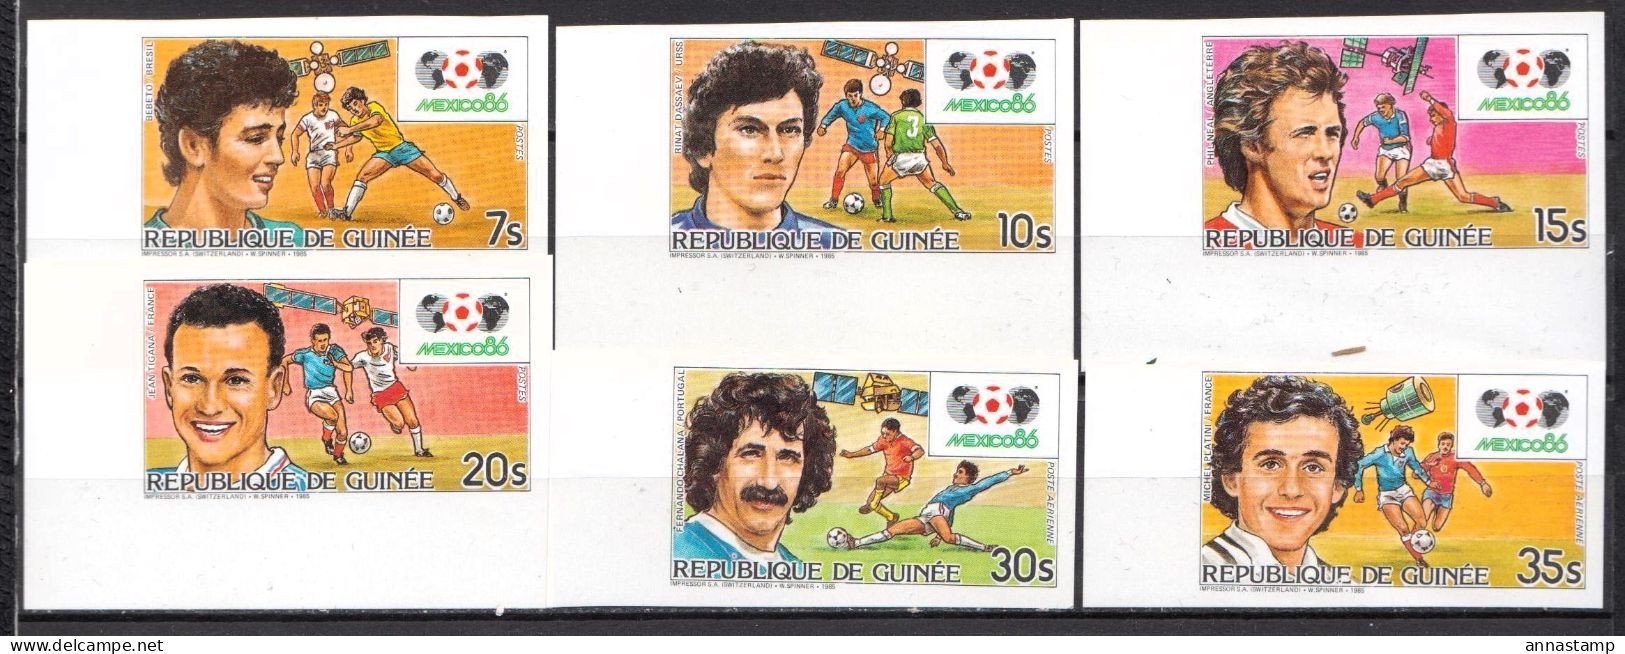 Guinea MNH Imperforated Set - 1986 – Mexique